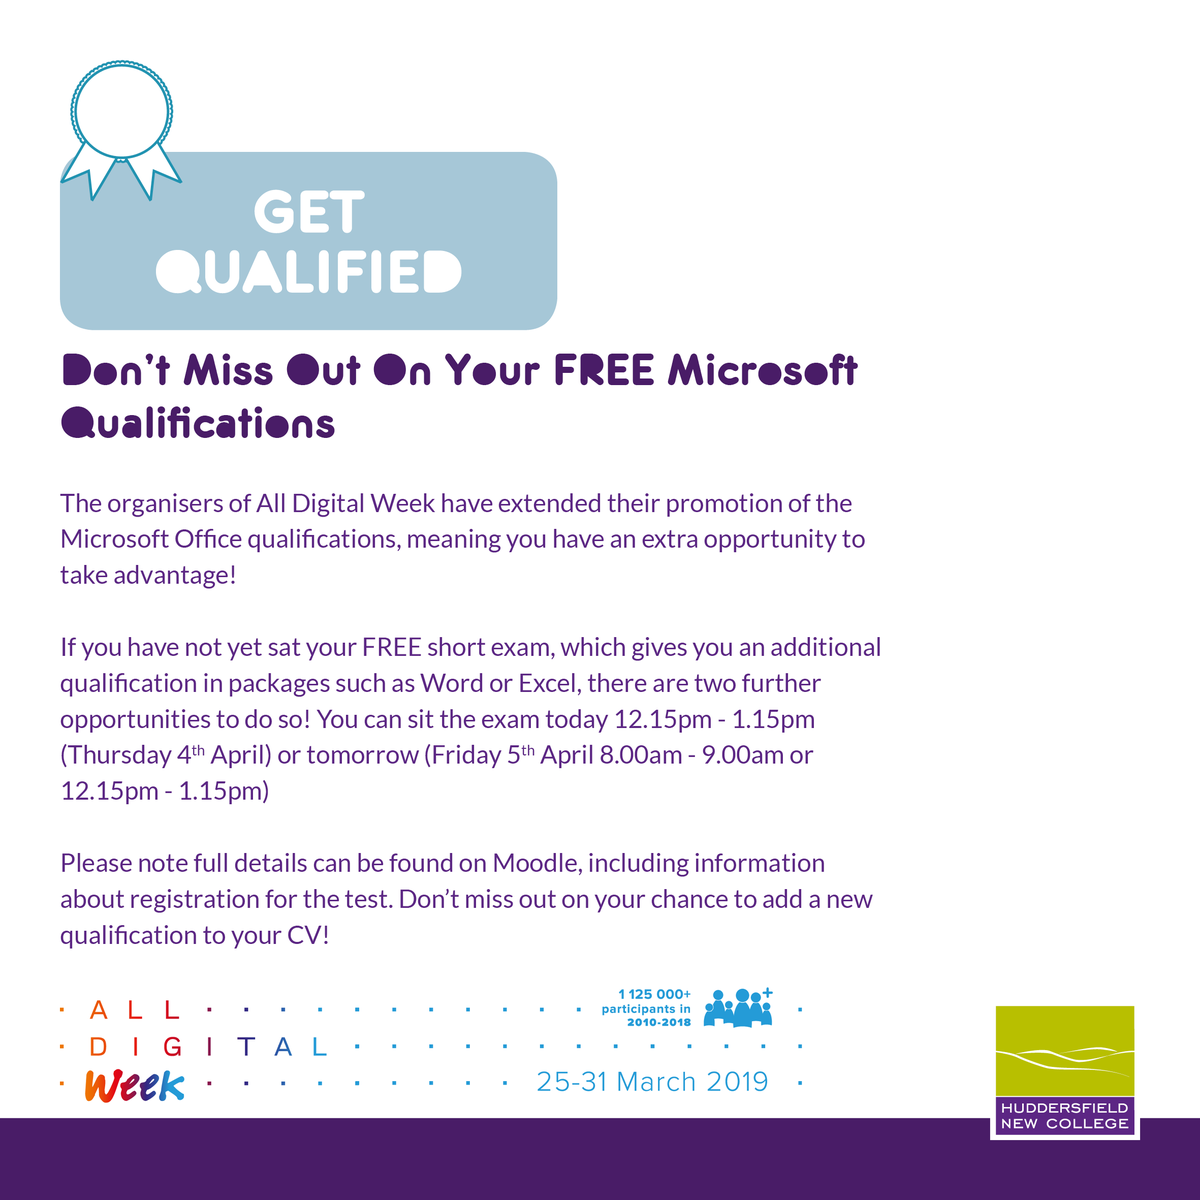 Hnc Official Due To The Success Of The Opportunity For Students To Take Their Free Microsoft Office Exams During Alldigitalweek We Have A Couple Of Extra Open Sessions Taking Place